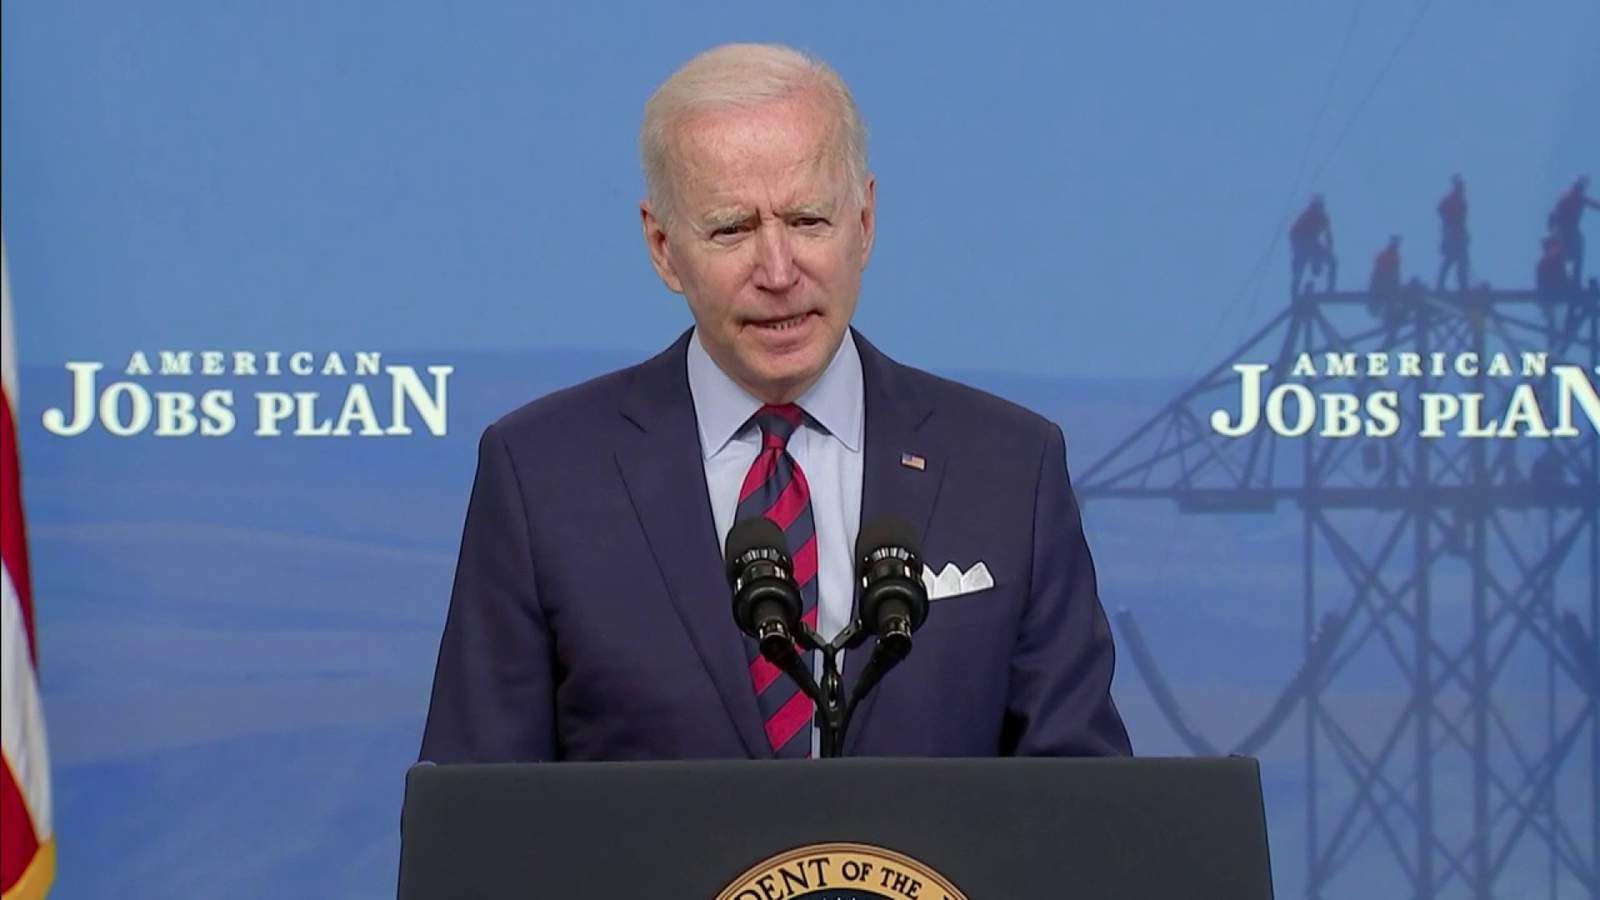 Biden talks about $2T American Jobs Plan: ‘Inaction is simply not an option’